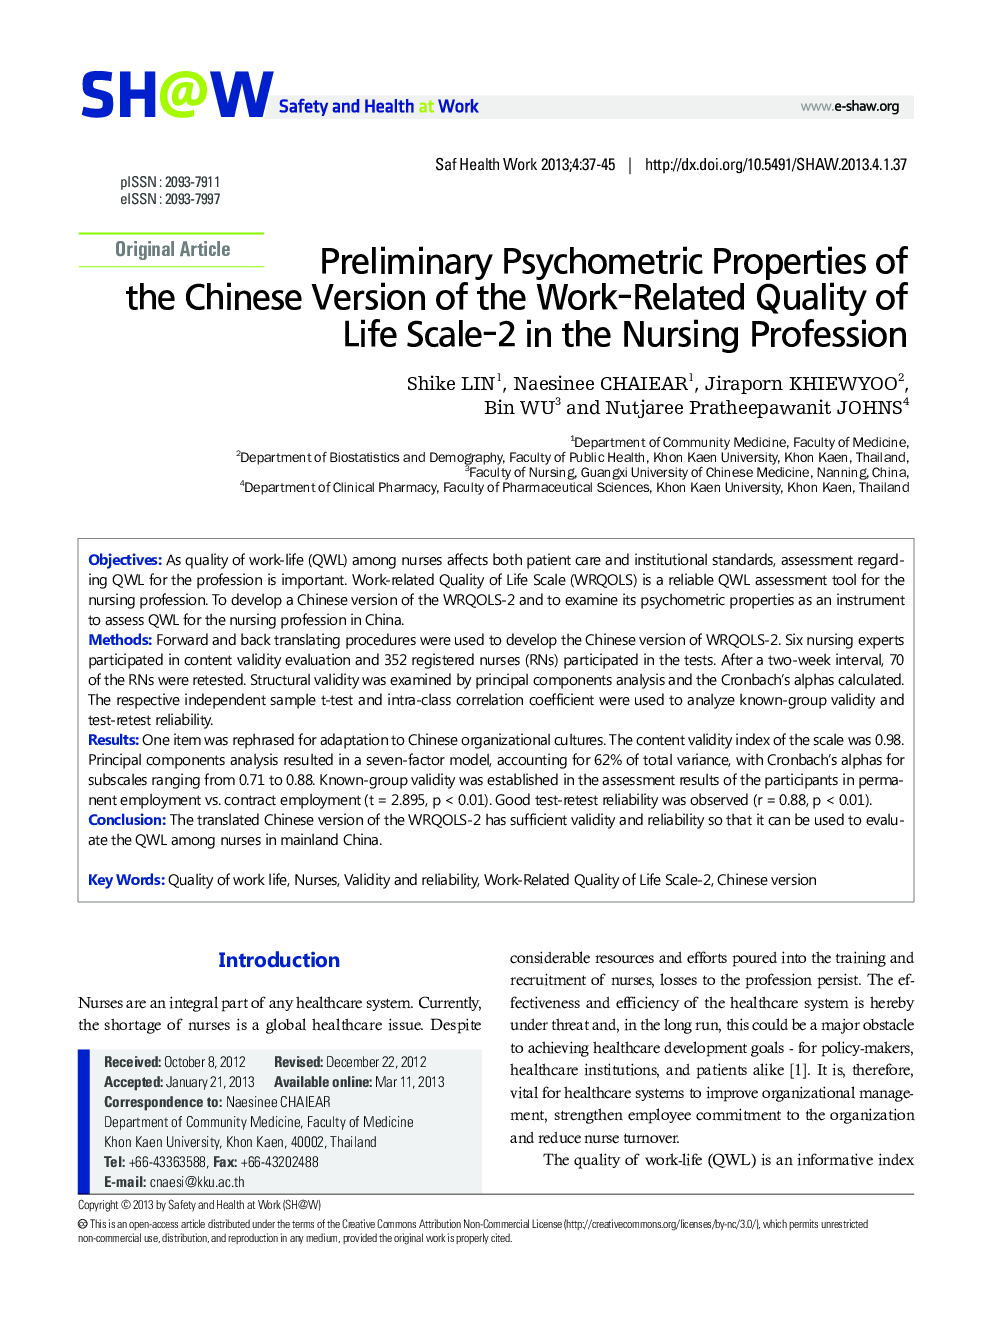 Preliminary Psychometric Properties of the Chinese Version of the Work-Related Quality of Life Scale-2 in the Nursing Profession